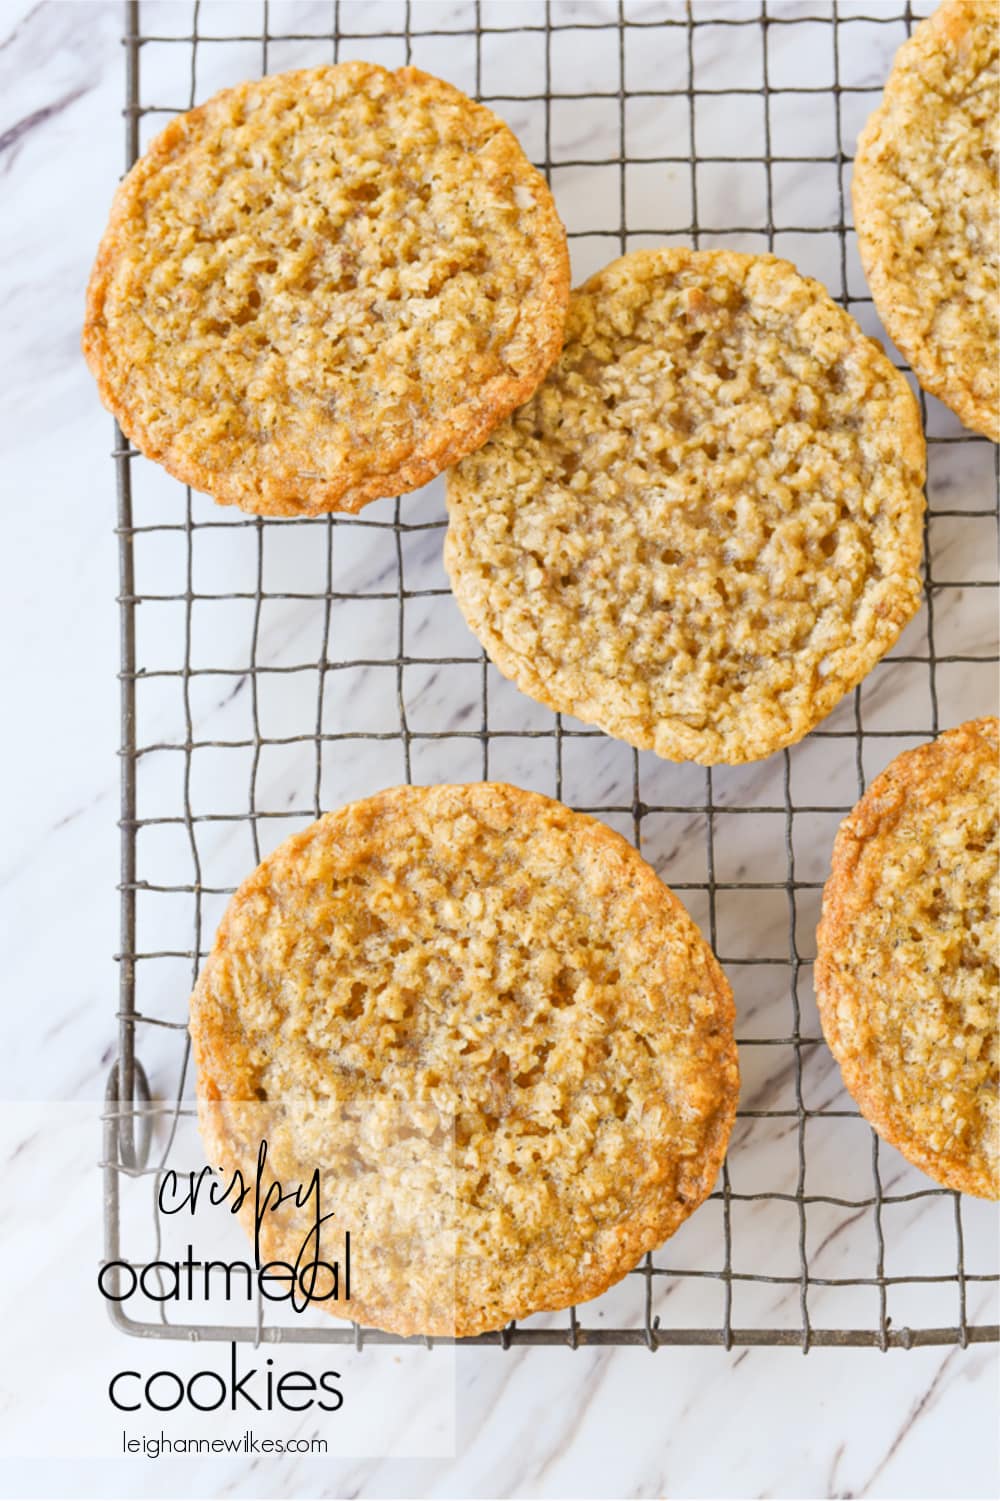 Crispy Oatmeal Cookies Recipe By Leigh Anne Wilkes,20th Anniversary Cake Ideas